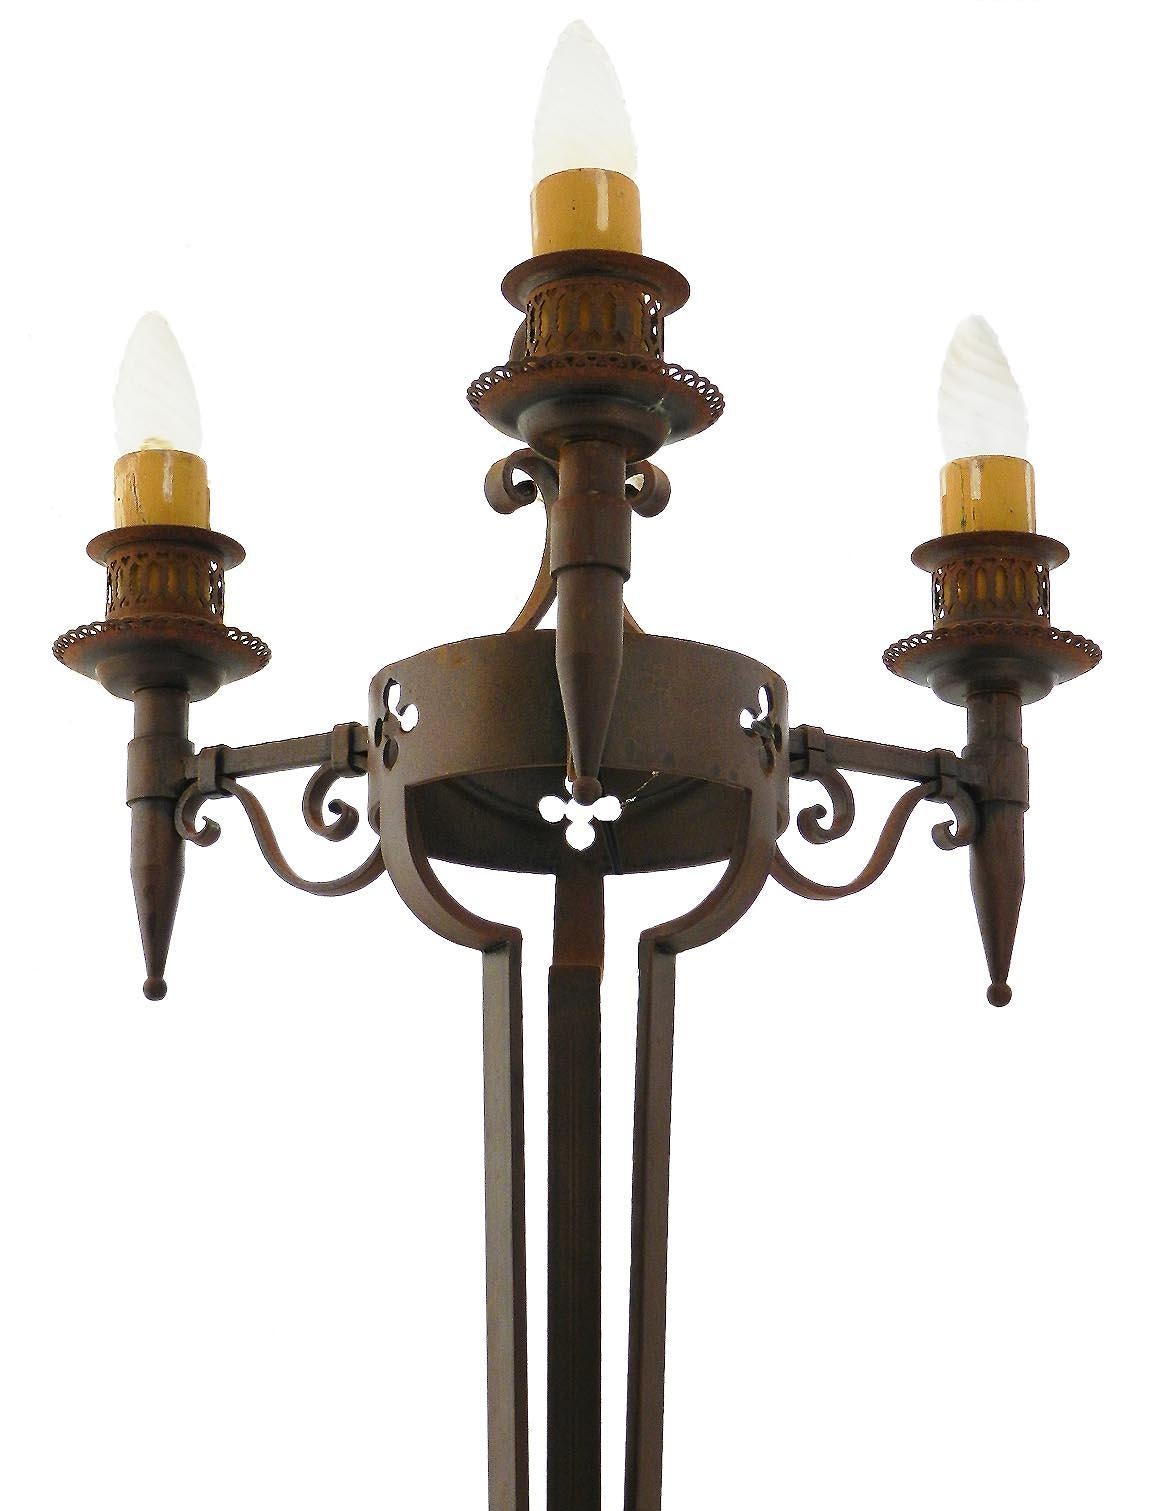 French Arts & Crafts Floor Lamp circa 1910 Wrought Iron